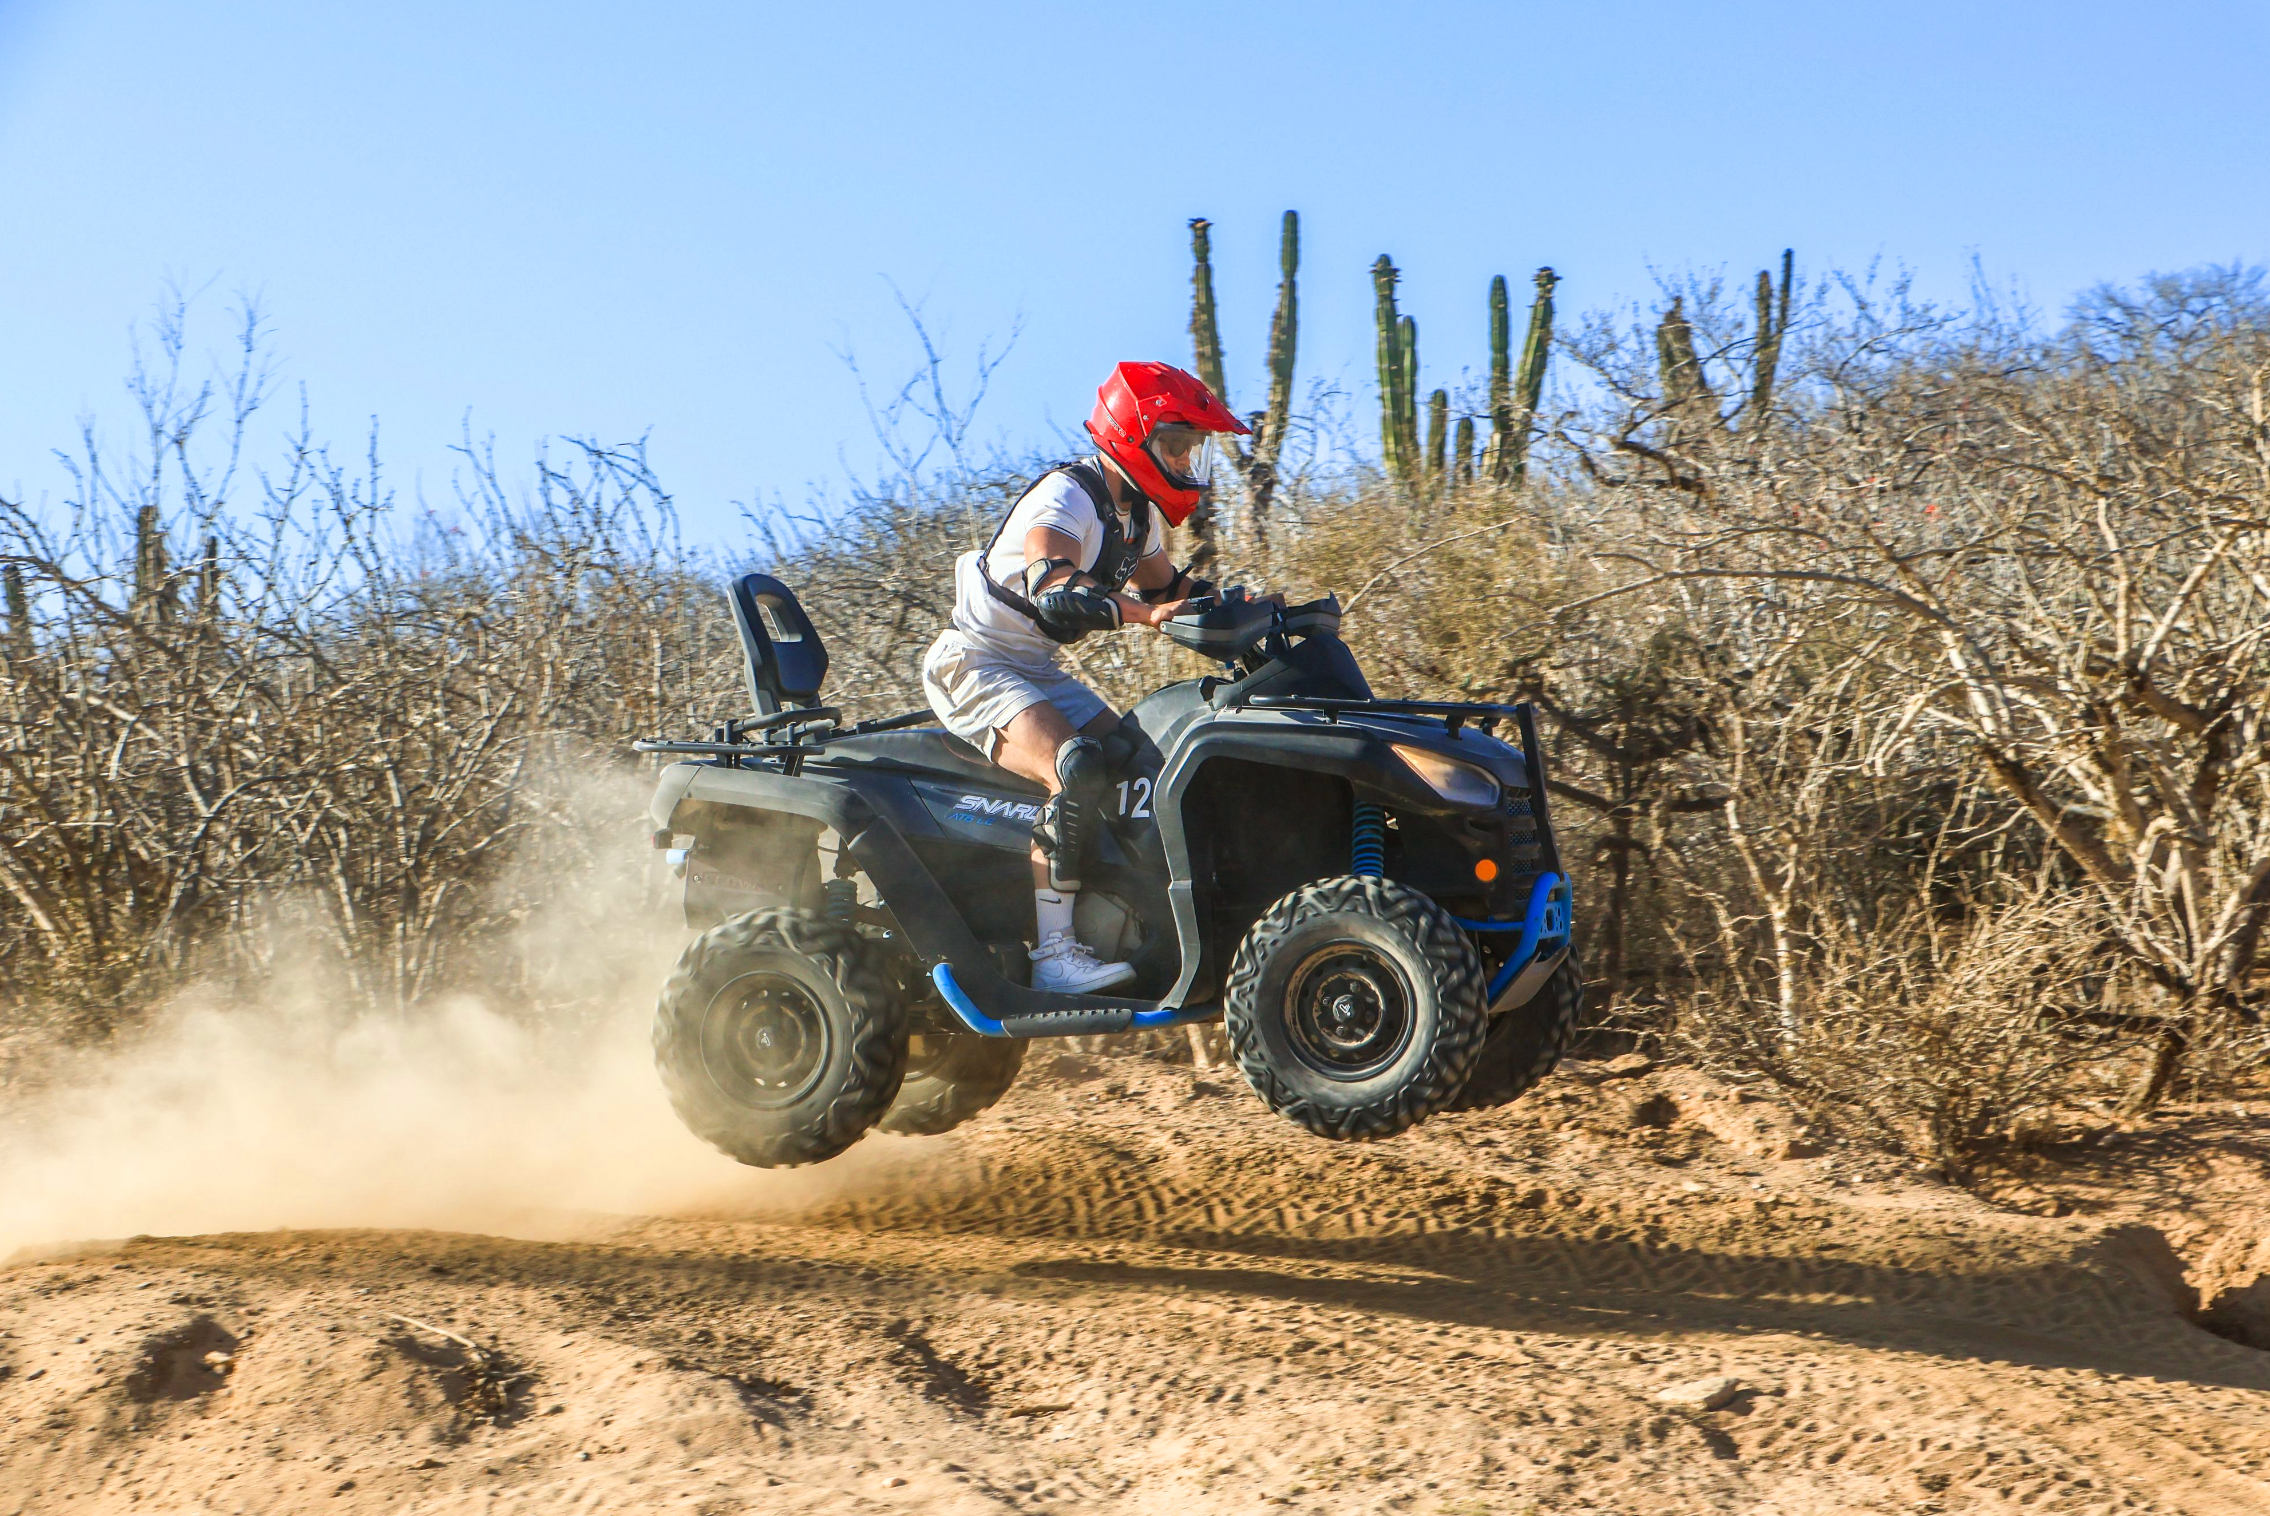 Client enjoying an ATV tour by Cabo Adventures